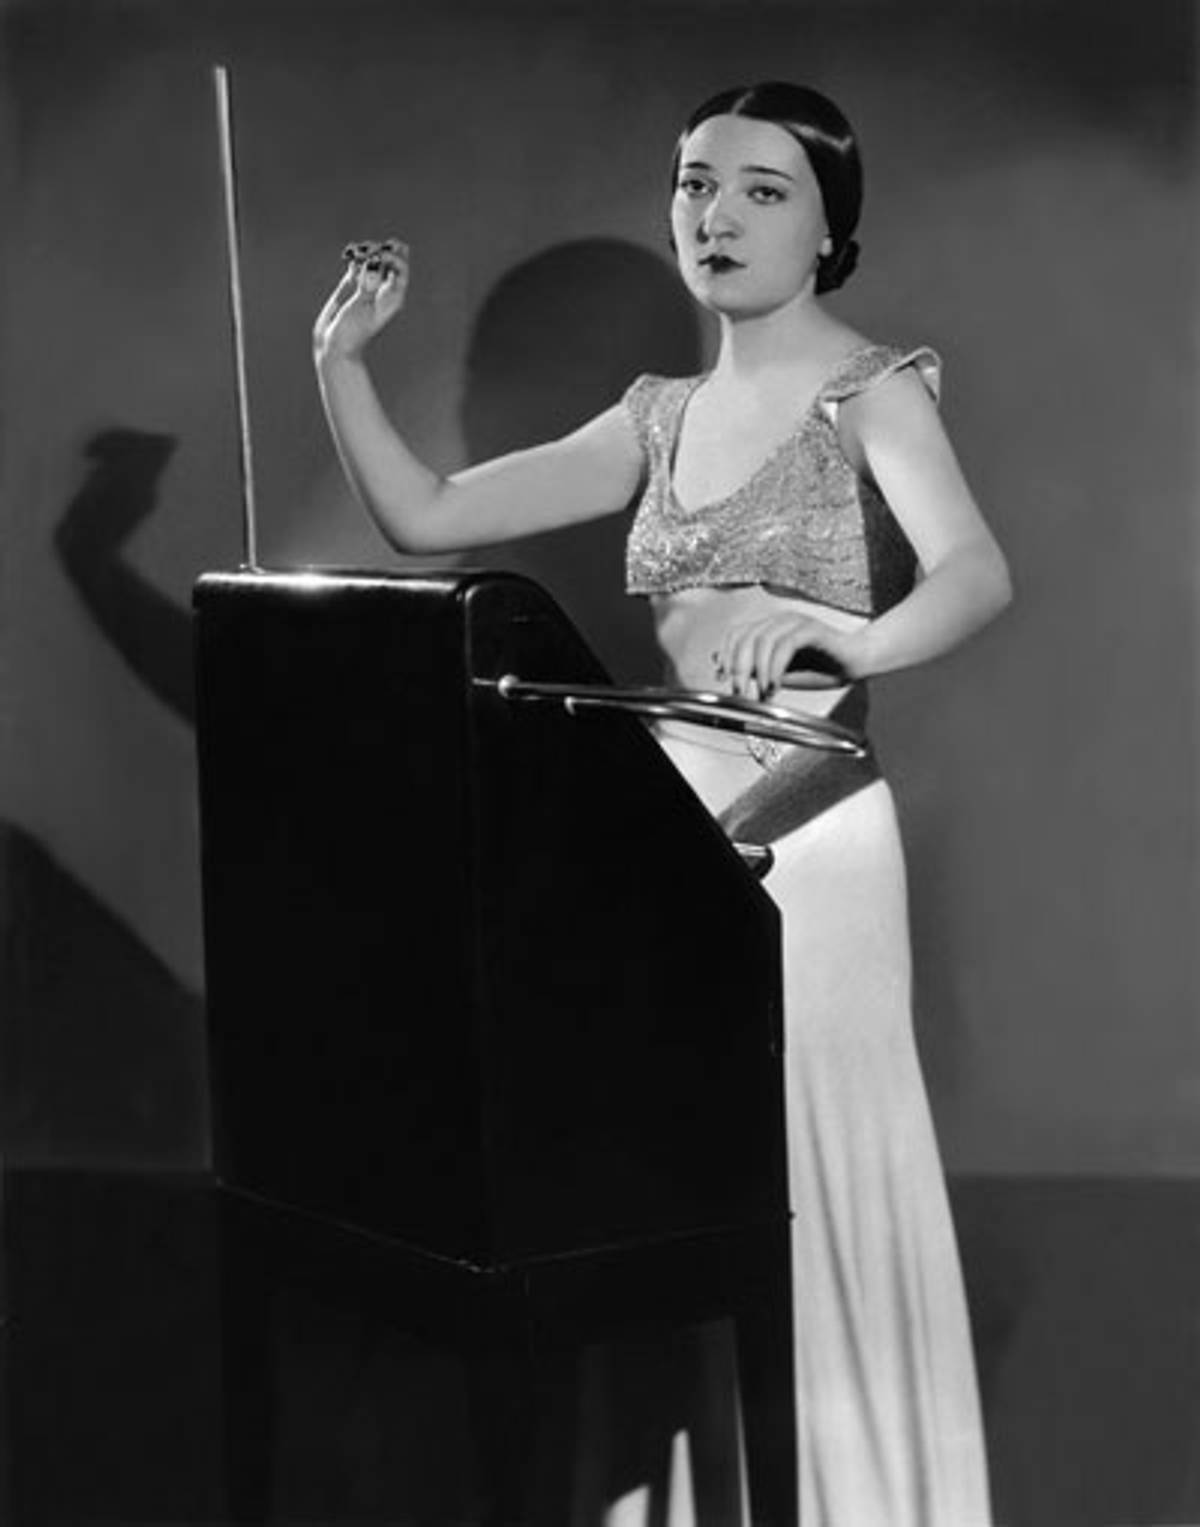 Clara Rockmore playing the theremin, circa mid-late-1930s (Photograph by Renato Toppo; courtesy of the Nadia Reisenberg/Clara Rockmore Foundation)